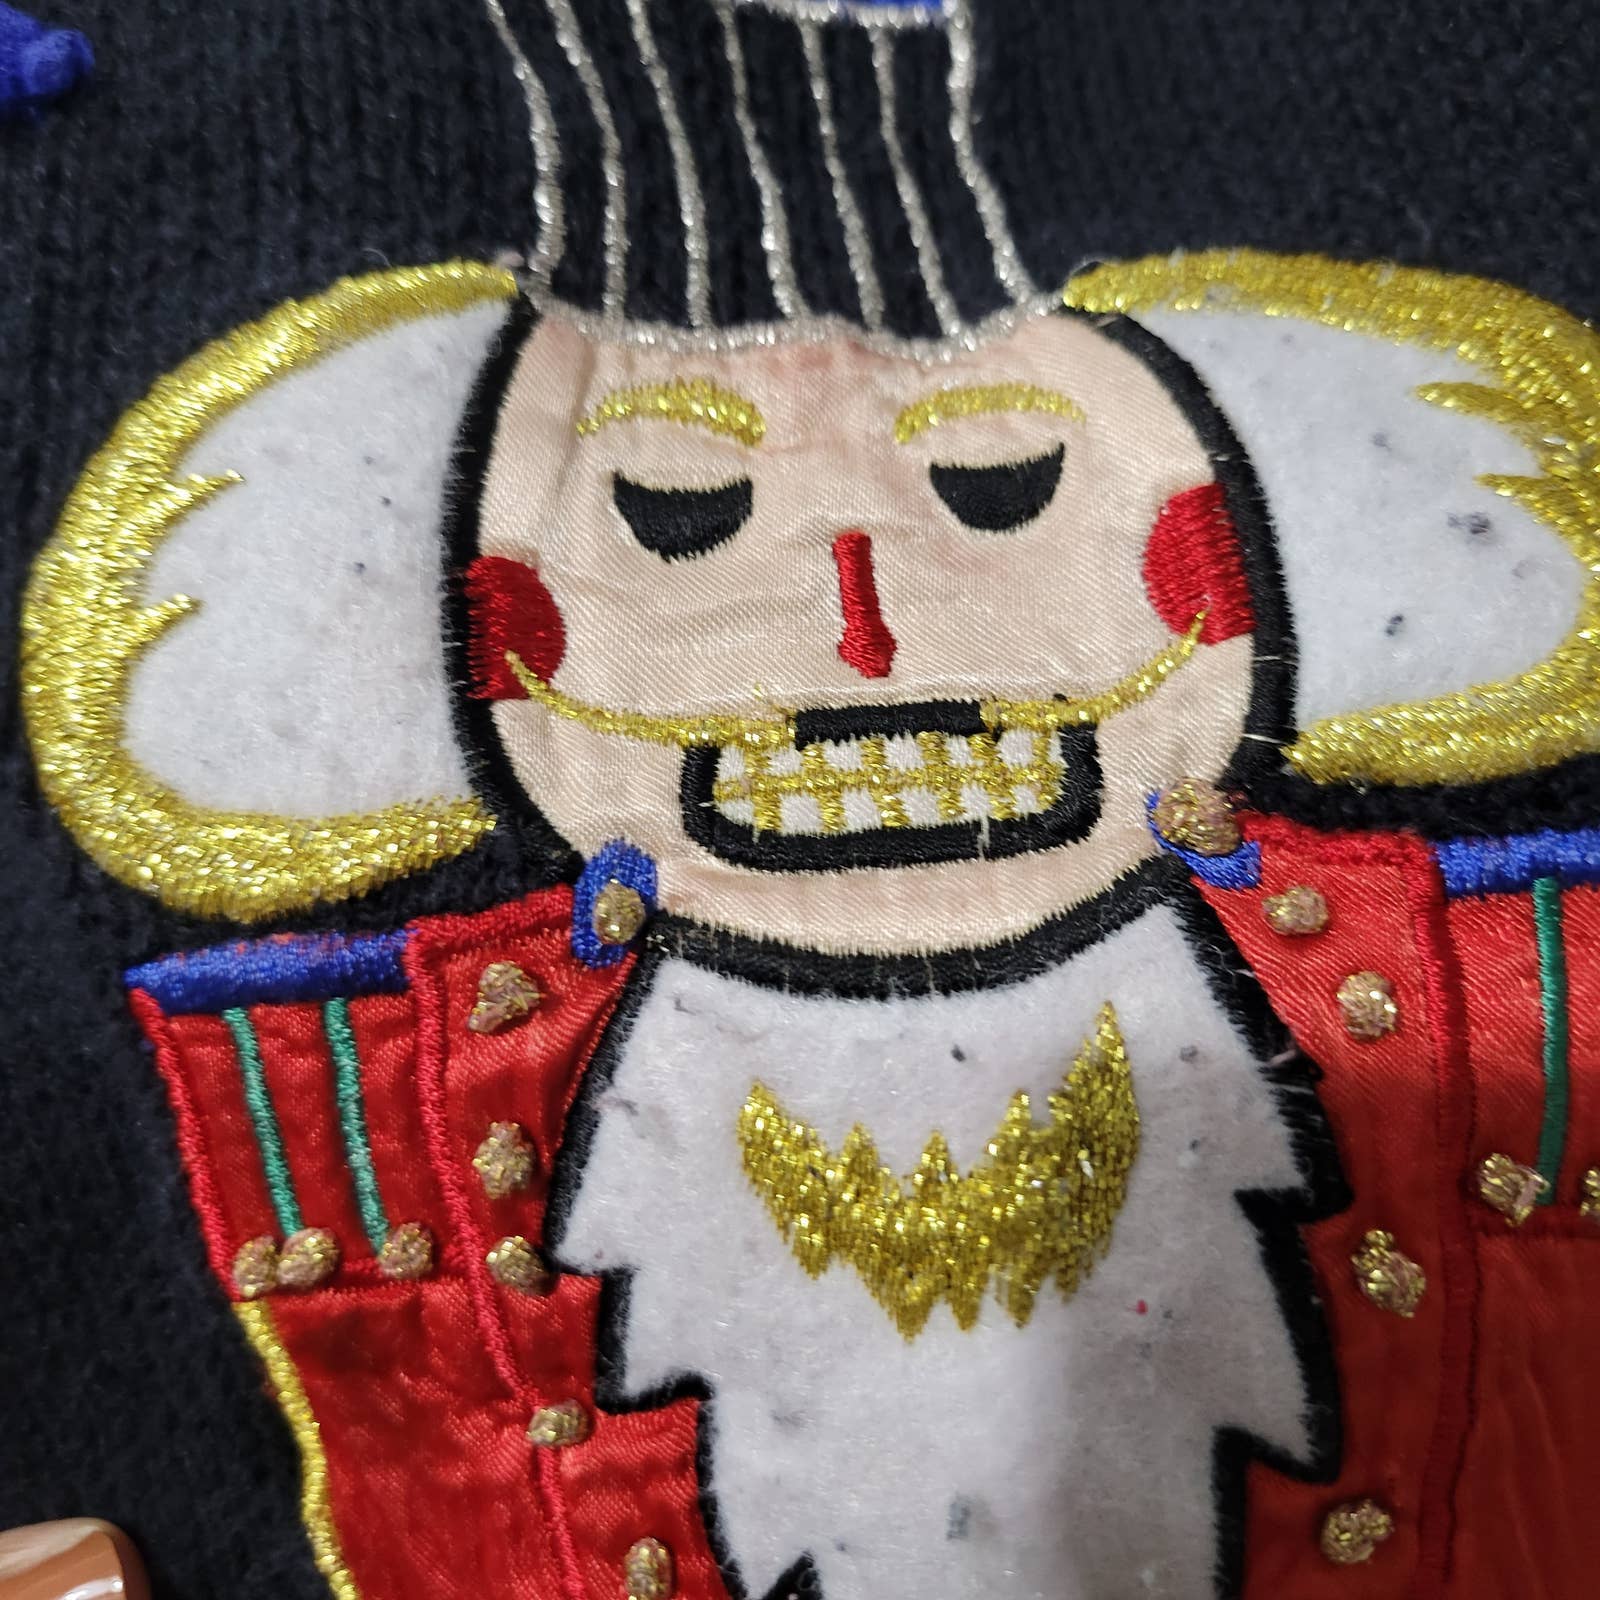 Ugly Christmas Sweater Vintage Toy Shoulder Embroidery Ornaments Work in Progress Size Large